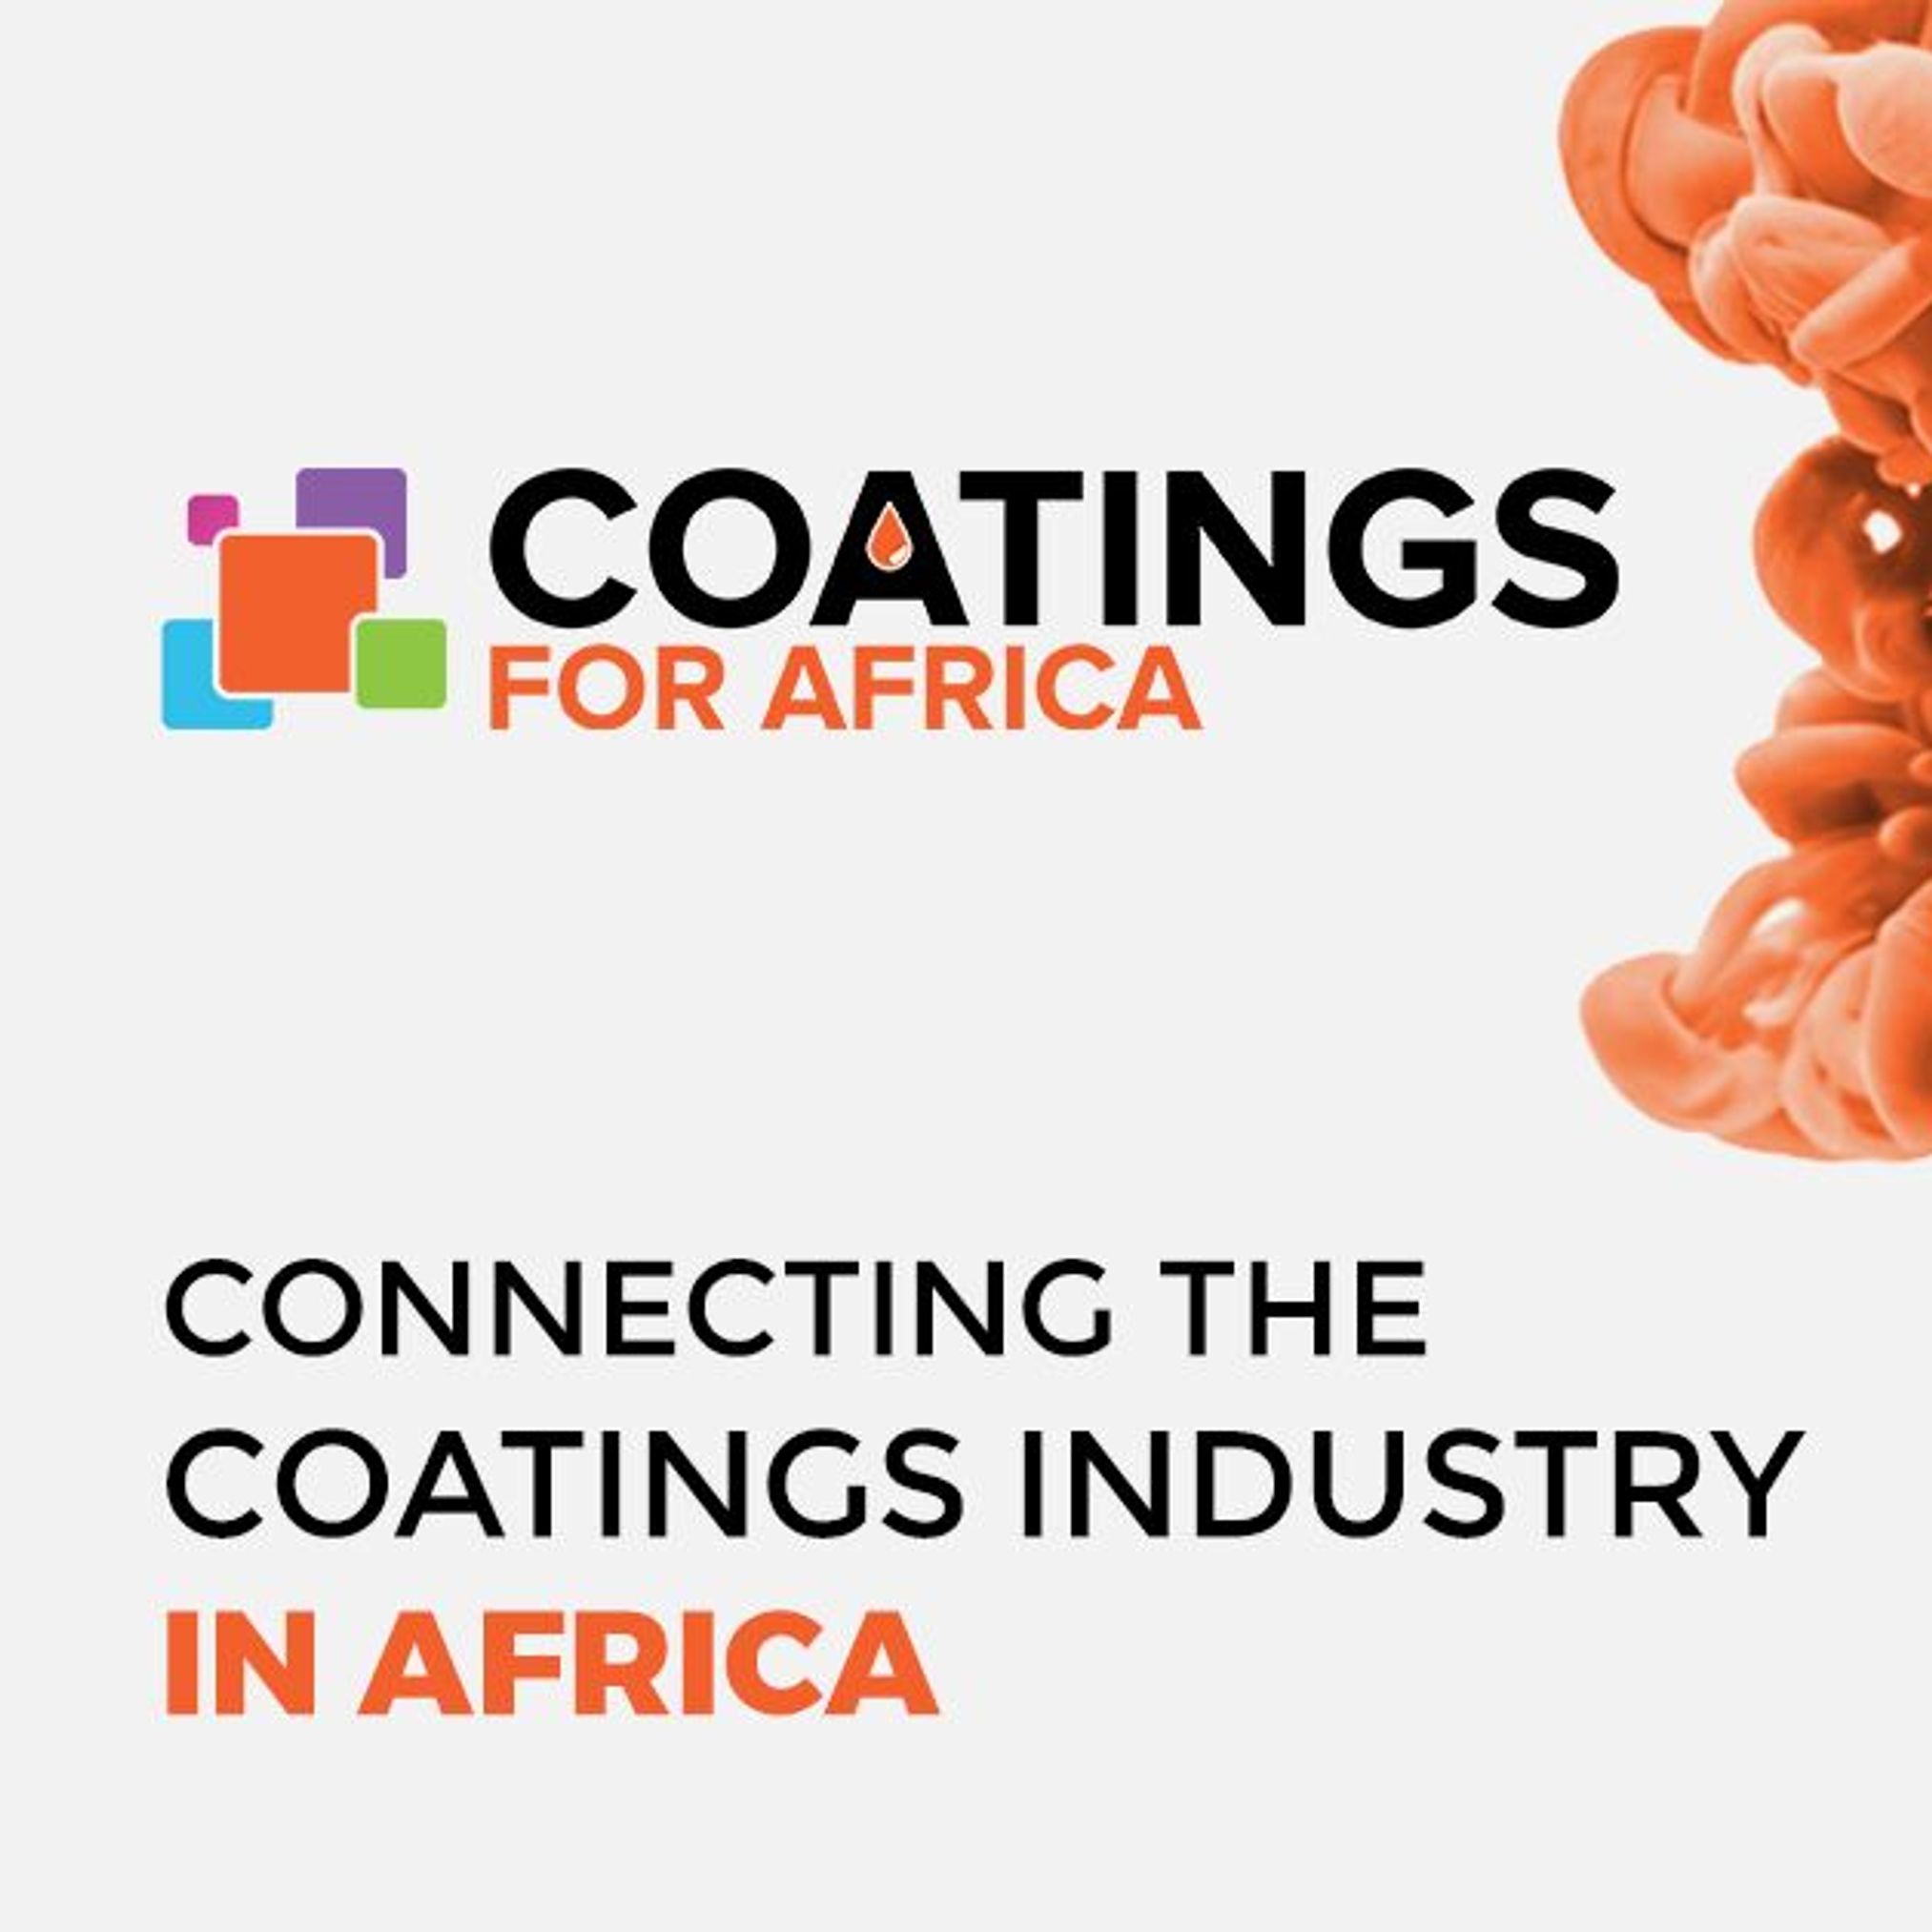 Coating for Africa